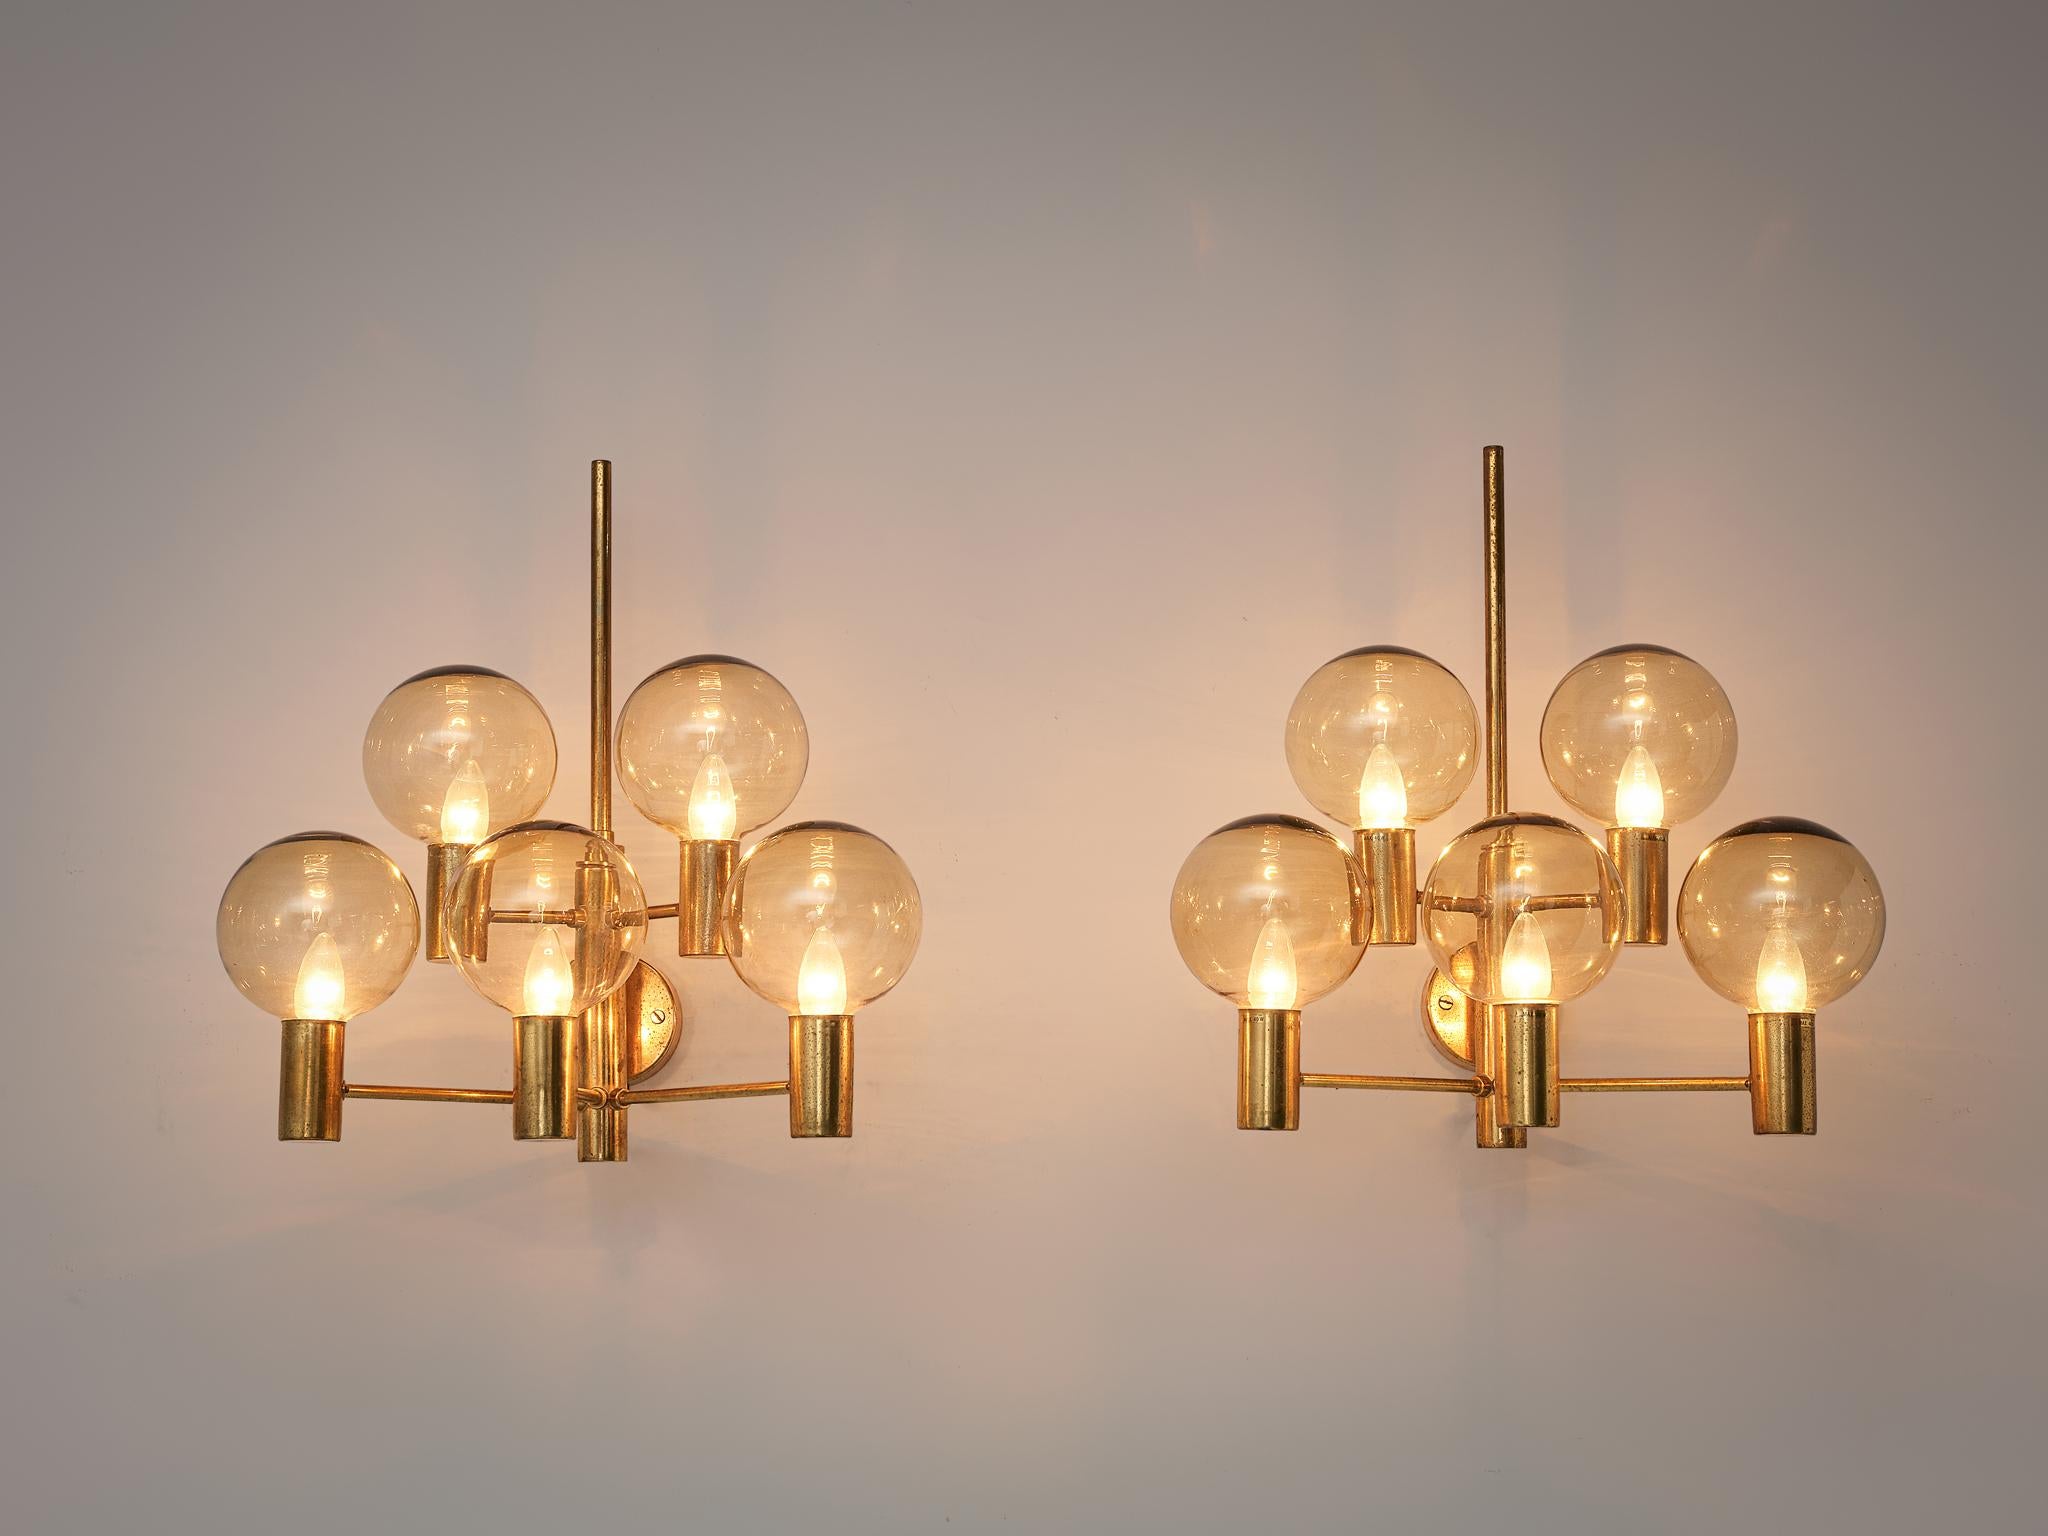 Hans Agne Jakobsson, wall lights, brass, glass, Sweden, 1960s.

Two large wall lights in patinated brass with clear glass shades by Hans Agne Jakobsson. Divided over five arms this light creates a stunning light partition. The lights are large and